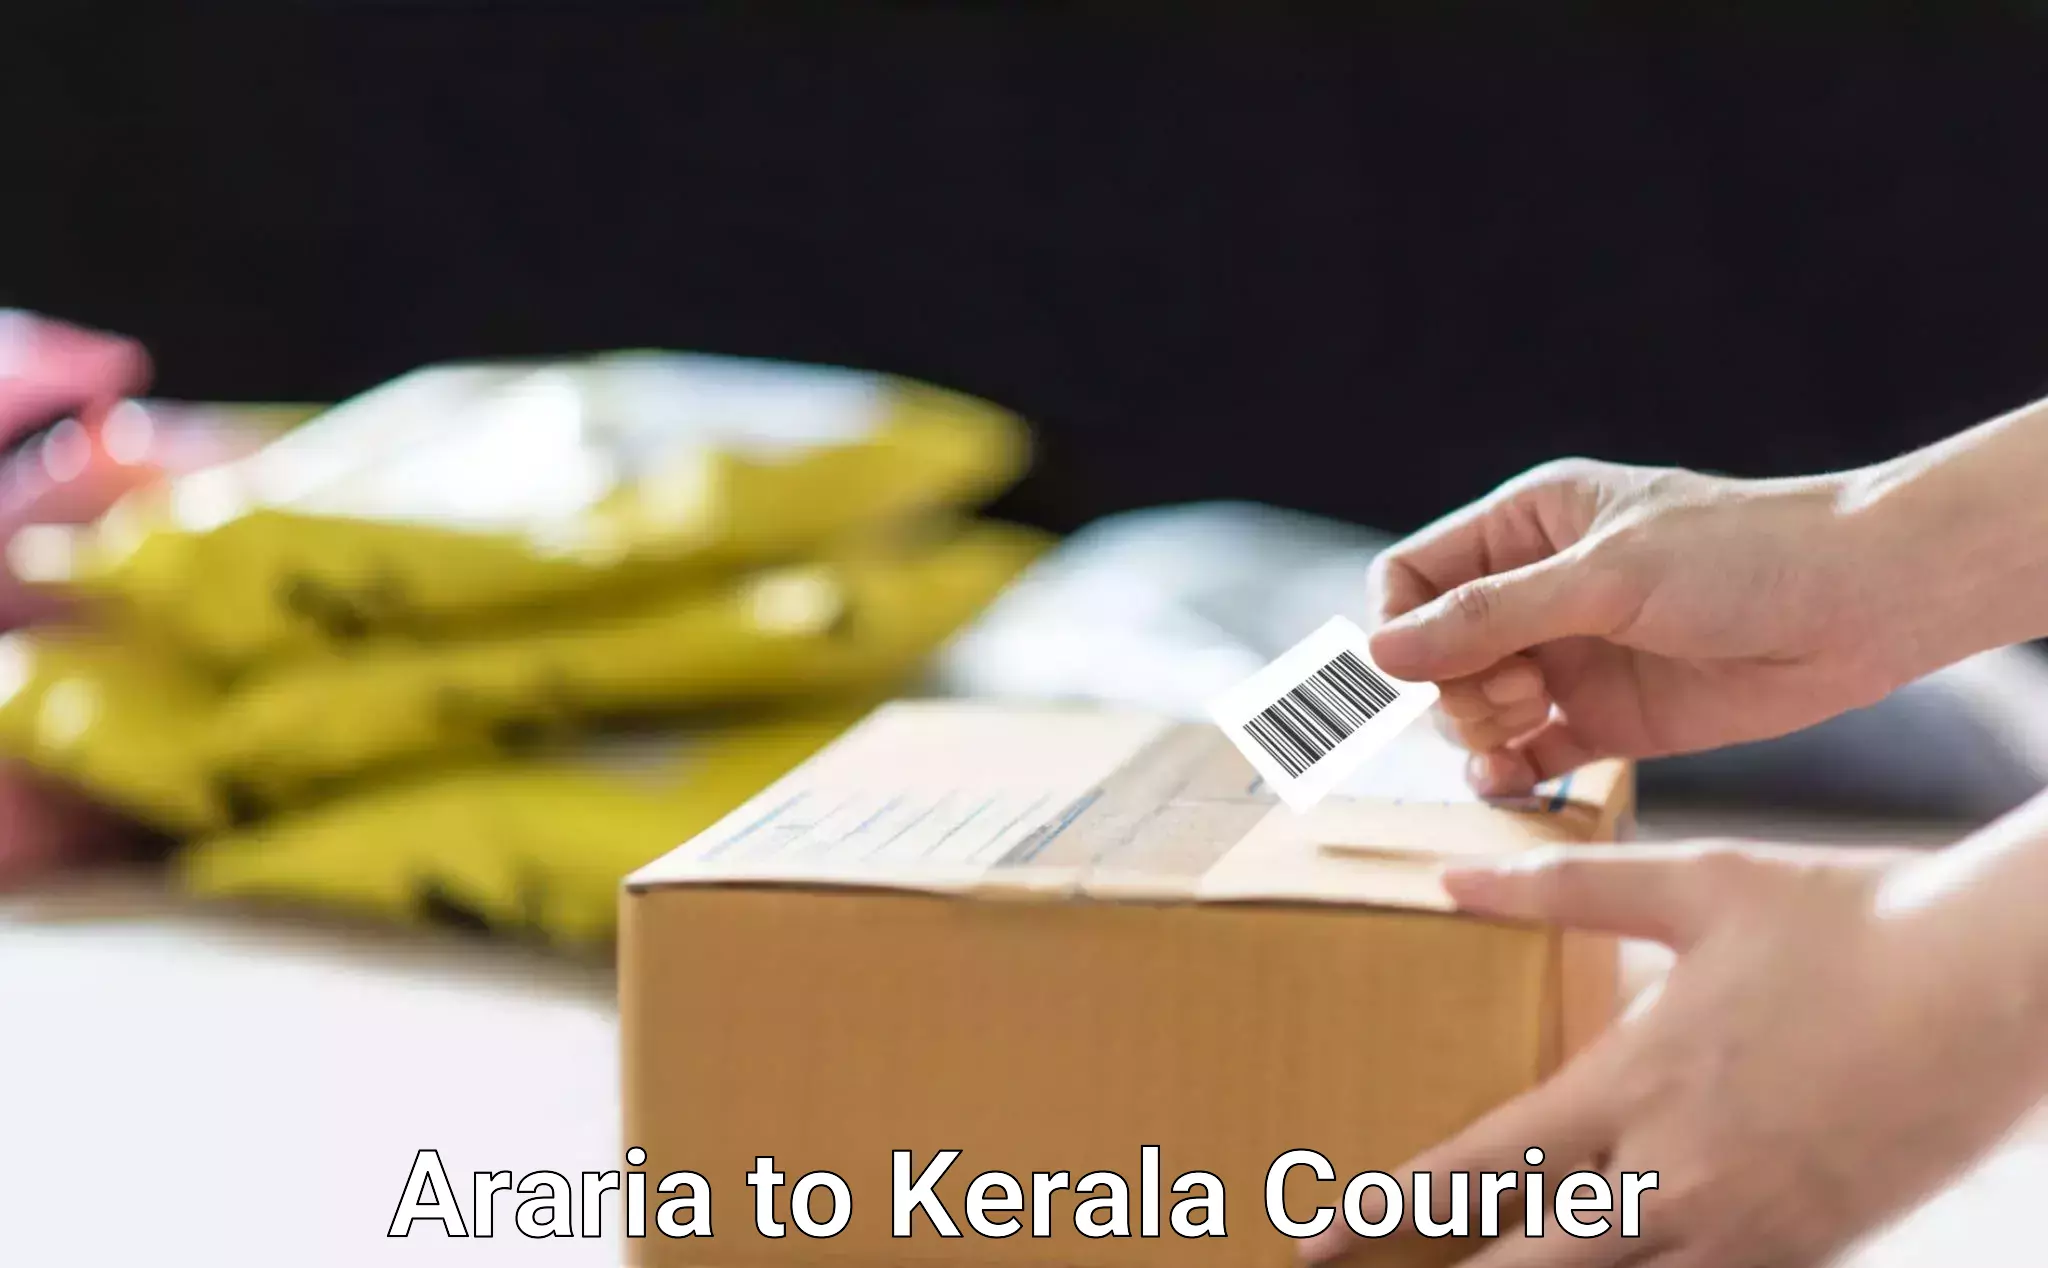 Professional movers and packers Araria to Kozhikode